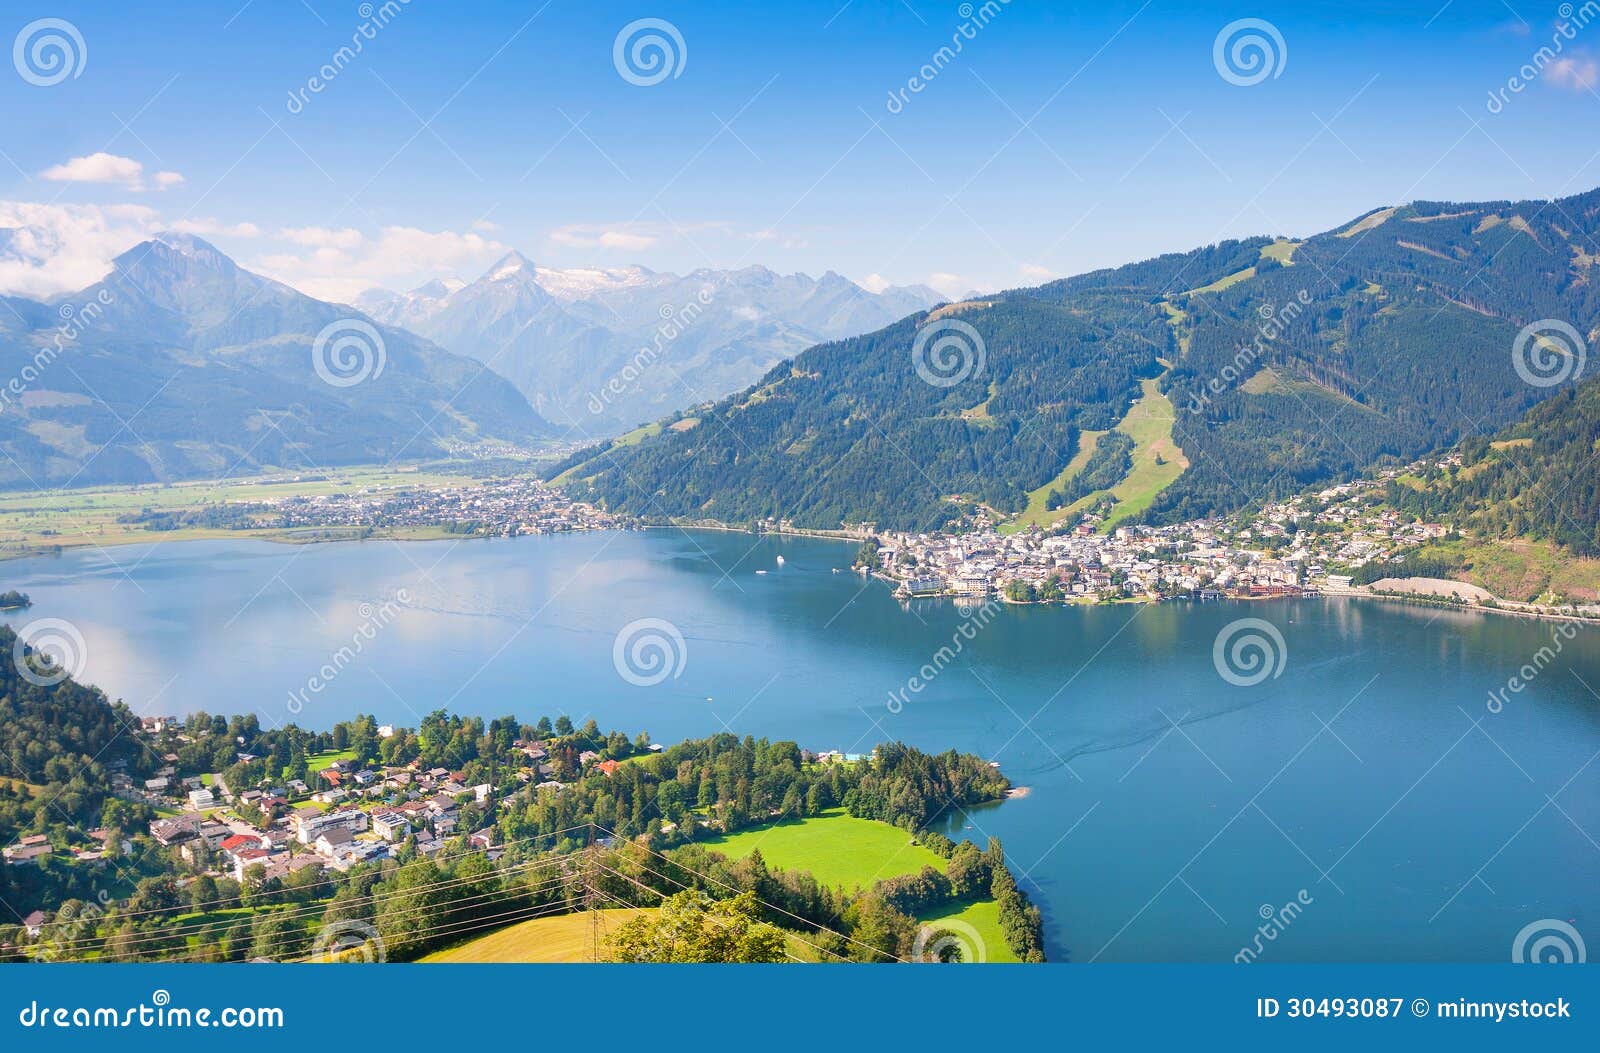 beautiful view of zell am see, austria